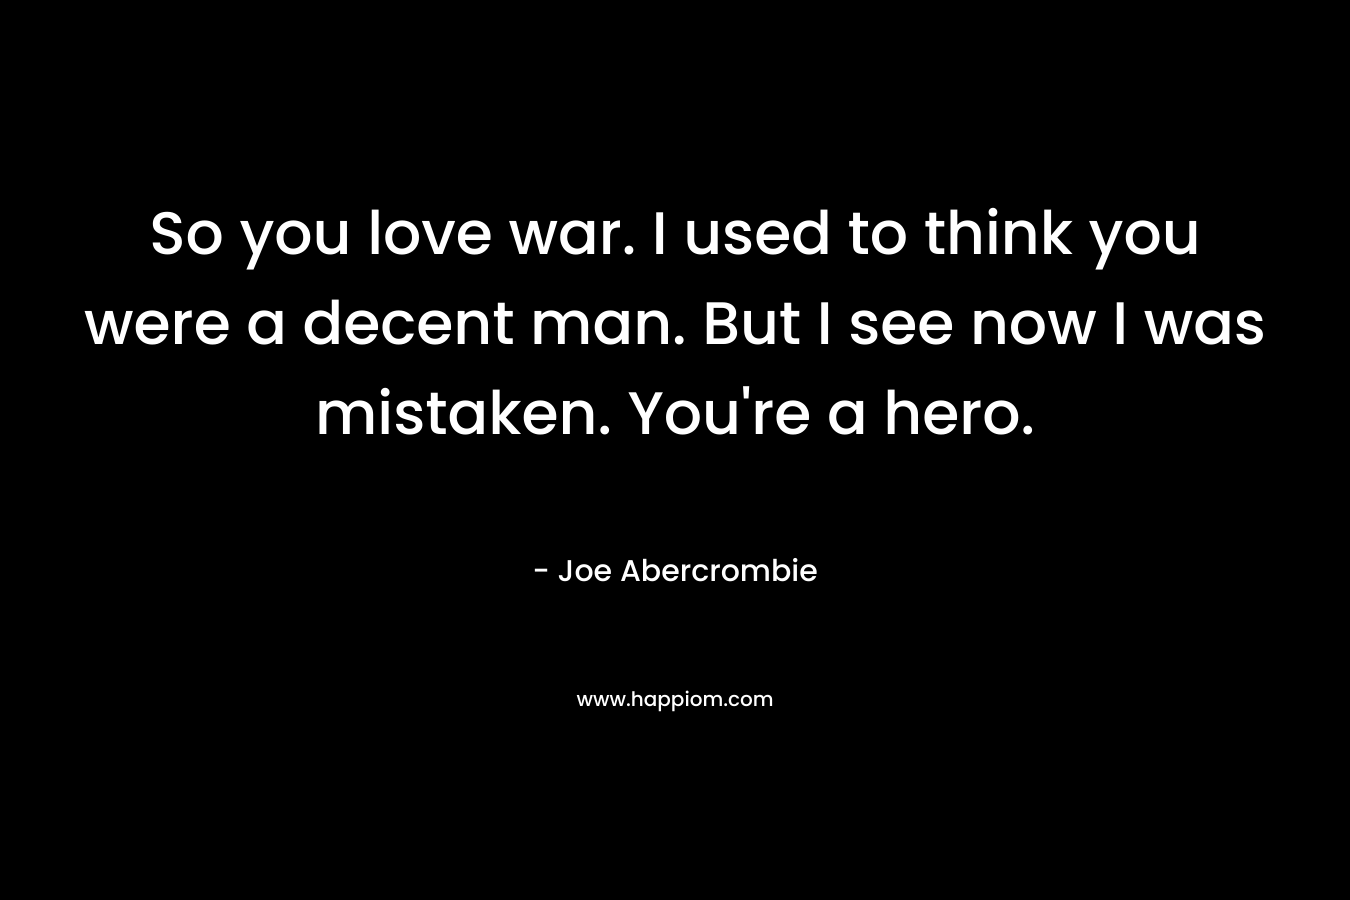 So you love war. I used to think you were a decent man. But I see now I was mistaken. You're a hero.